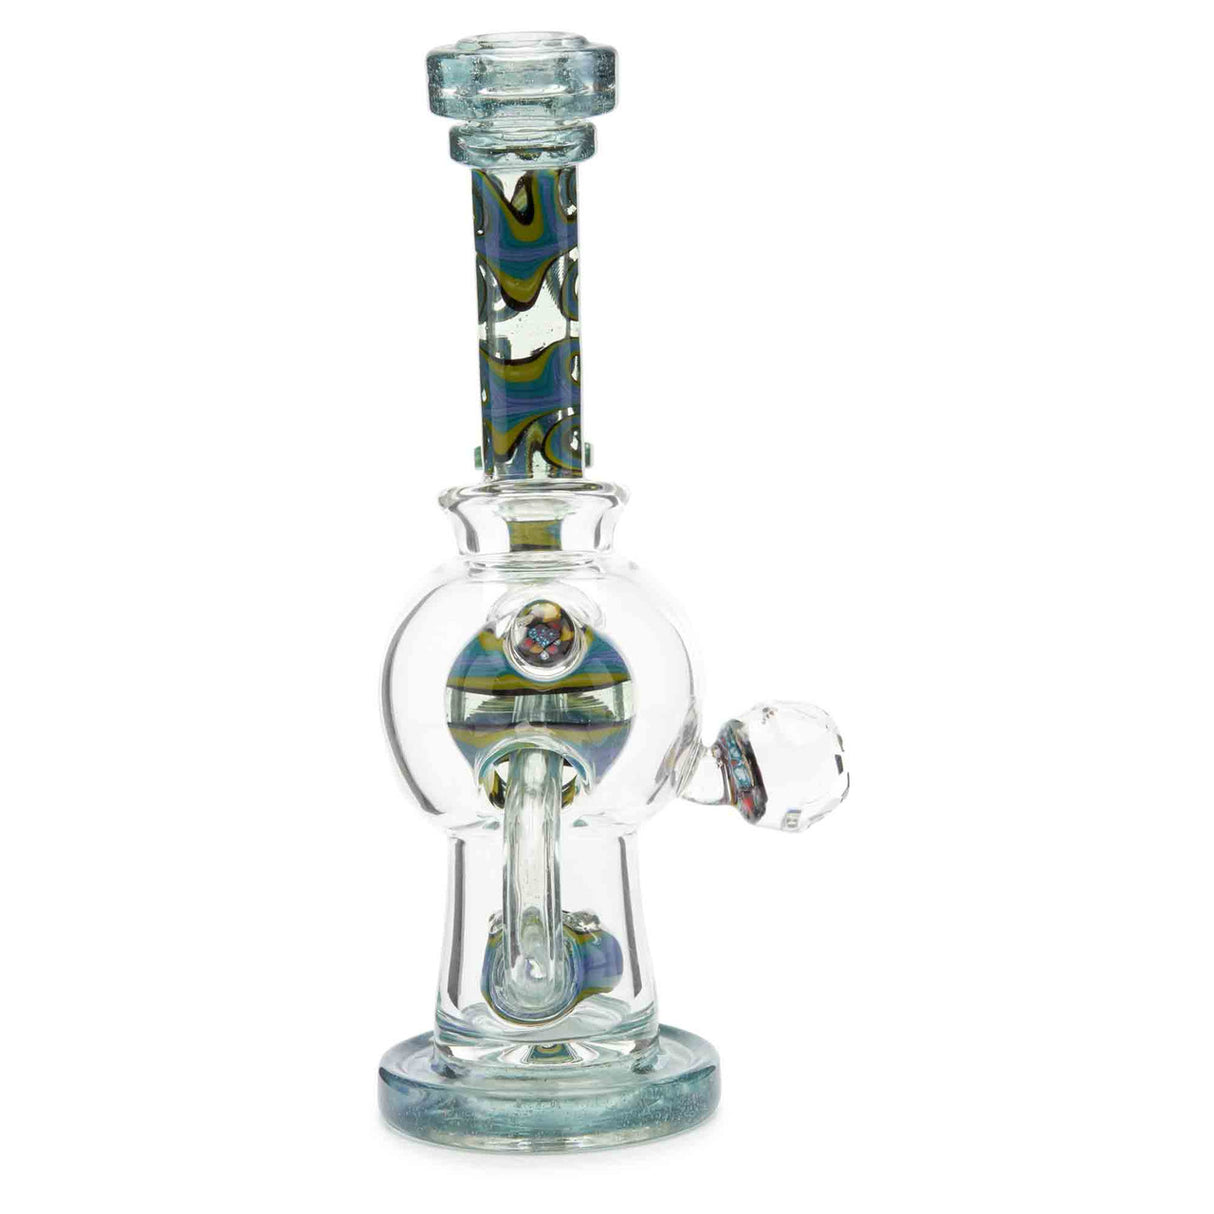 Dynamic Glass Ball Rig Worked shop dab rigs